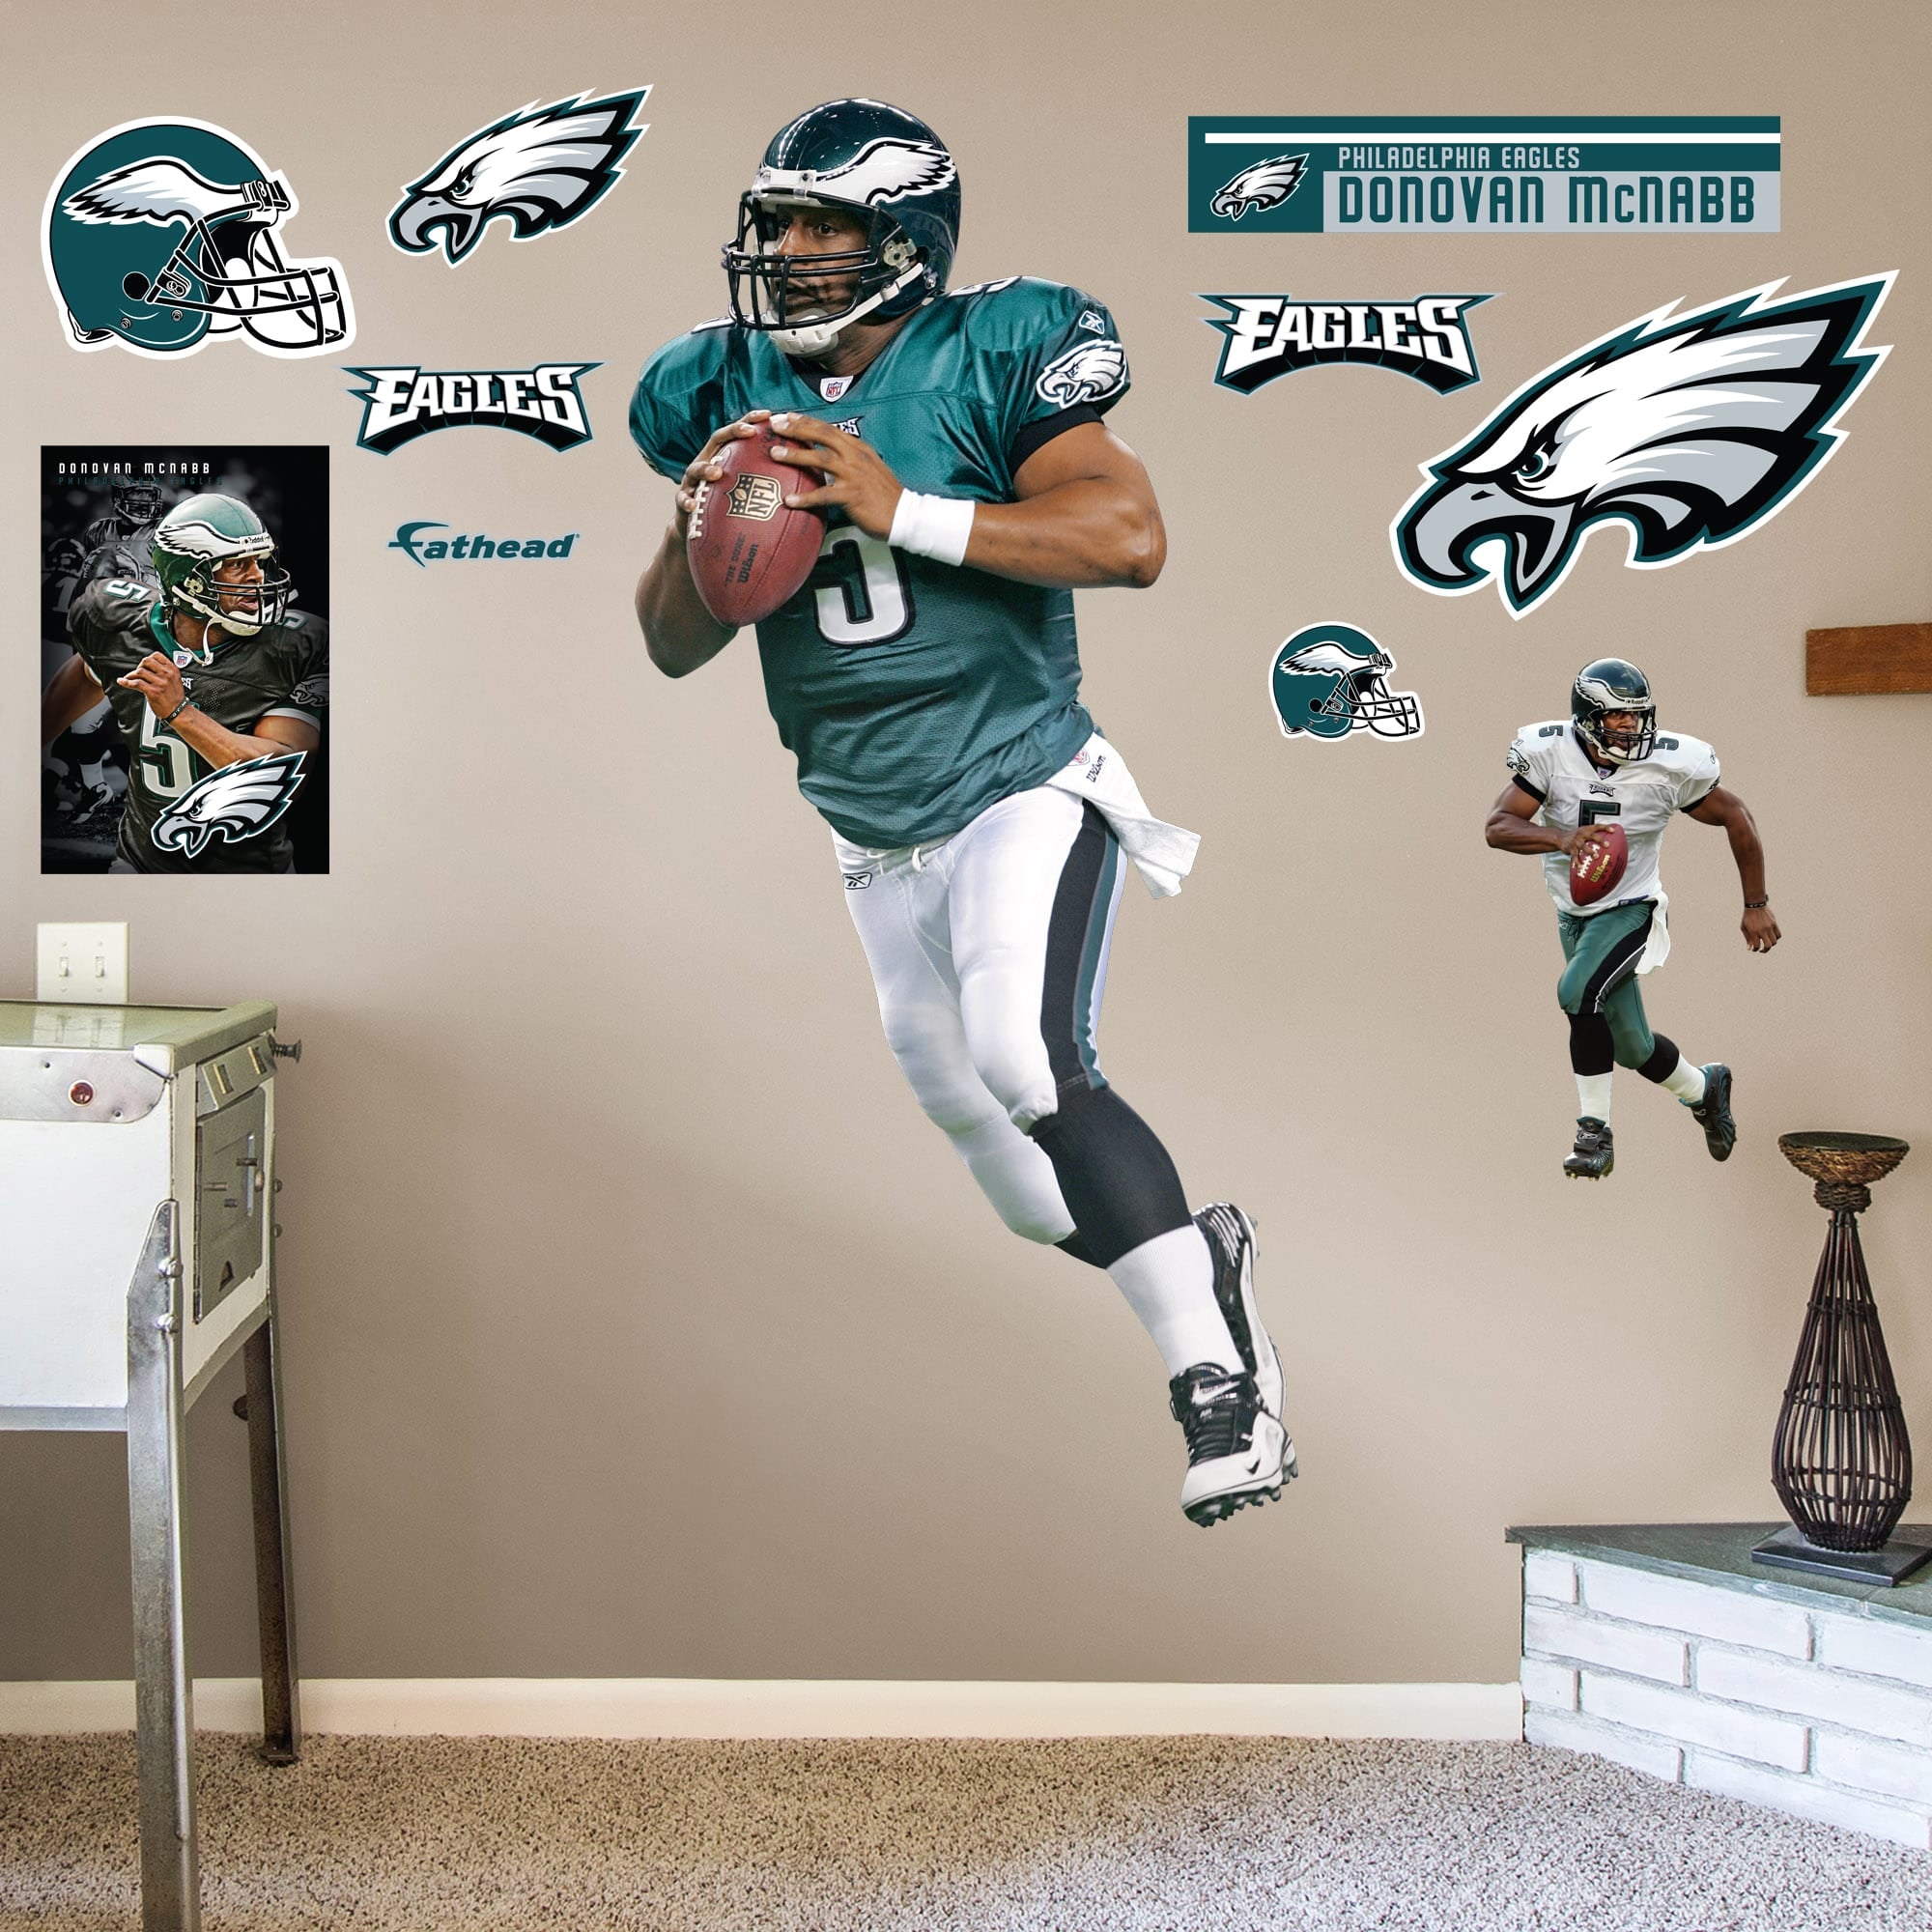 Donovan McNabb for Philadelphia Eagles: Legend - Officially Licensed NFL Removable Wall Decal Life-Size Athlete + 10 Decals (36"